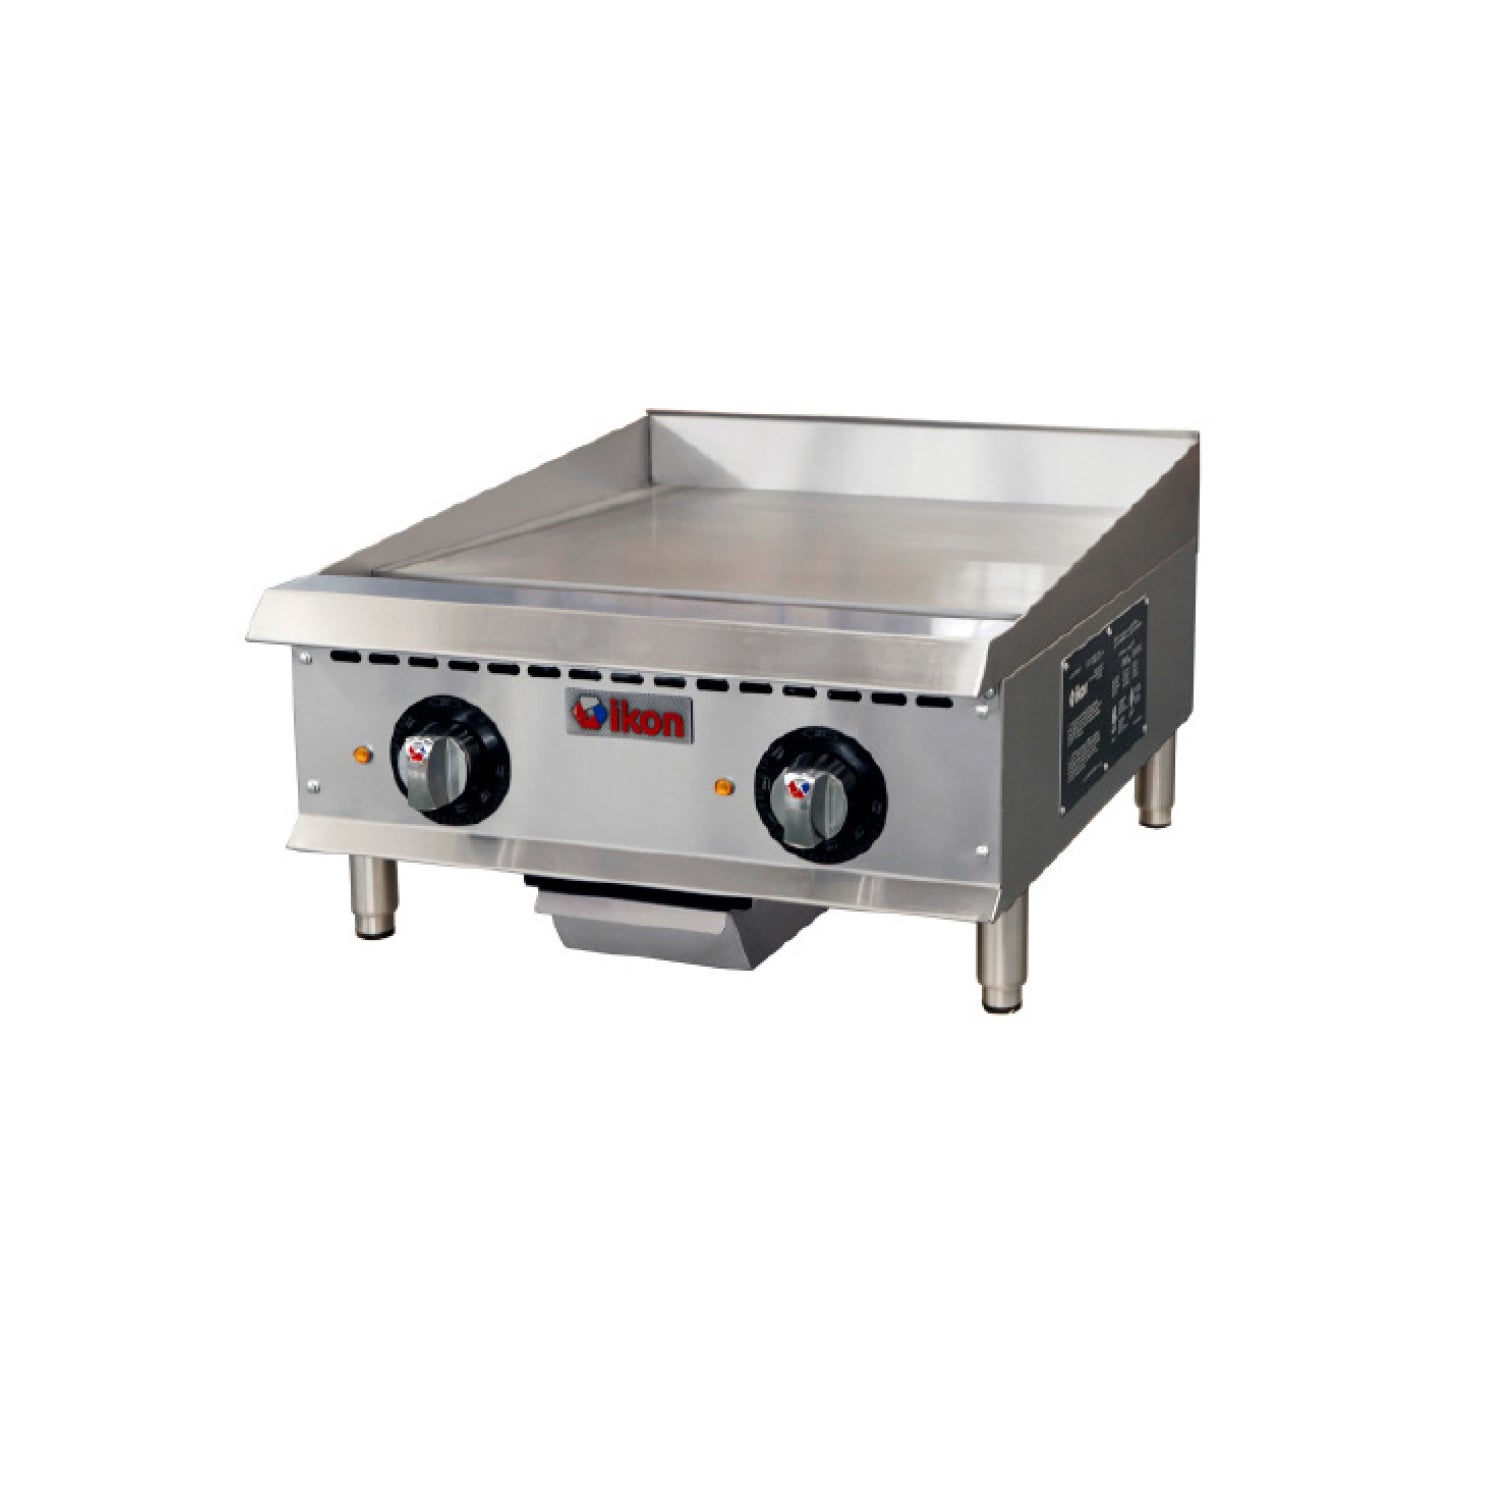 IKON - ITG-24E, 24" Electric Griddles With 8.0 KW Power